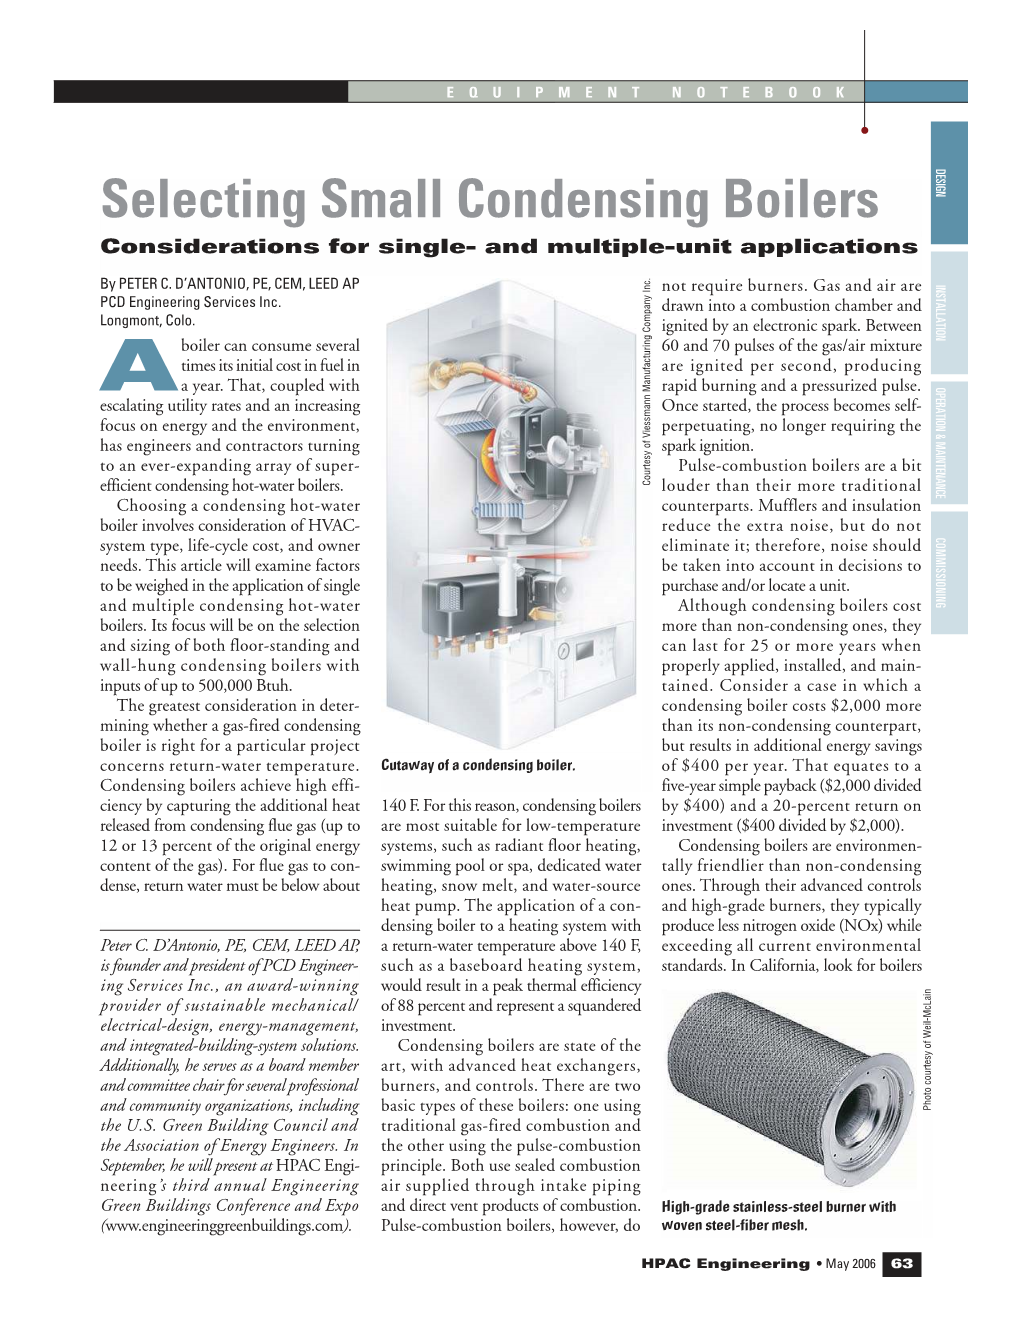 Selecting Small Condensing Boilers Considerations for Single- and Multiple-Unit Applications